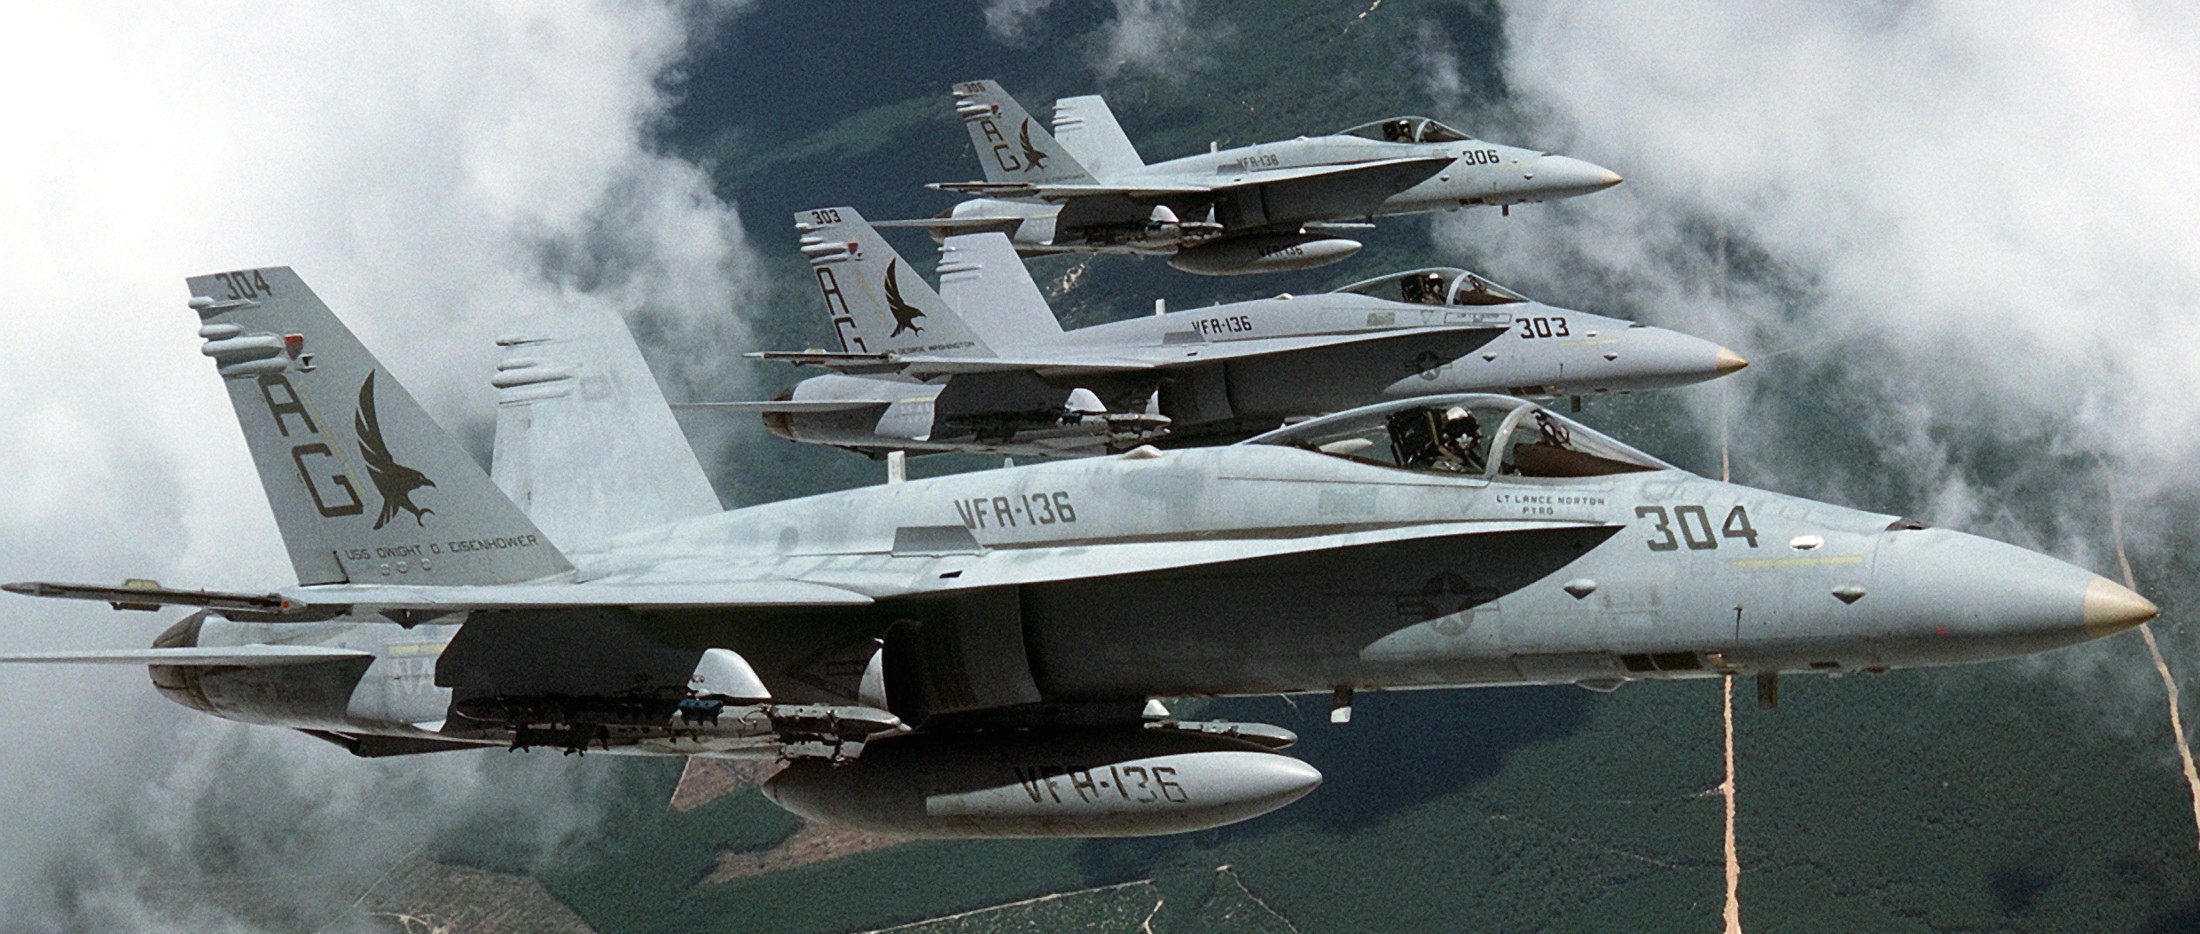 vfa-136 knighthawks strike fighter squadron f/a-18c hornet 1992 89 cvw-7 carrier air wing